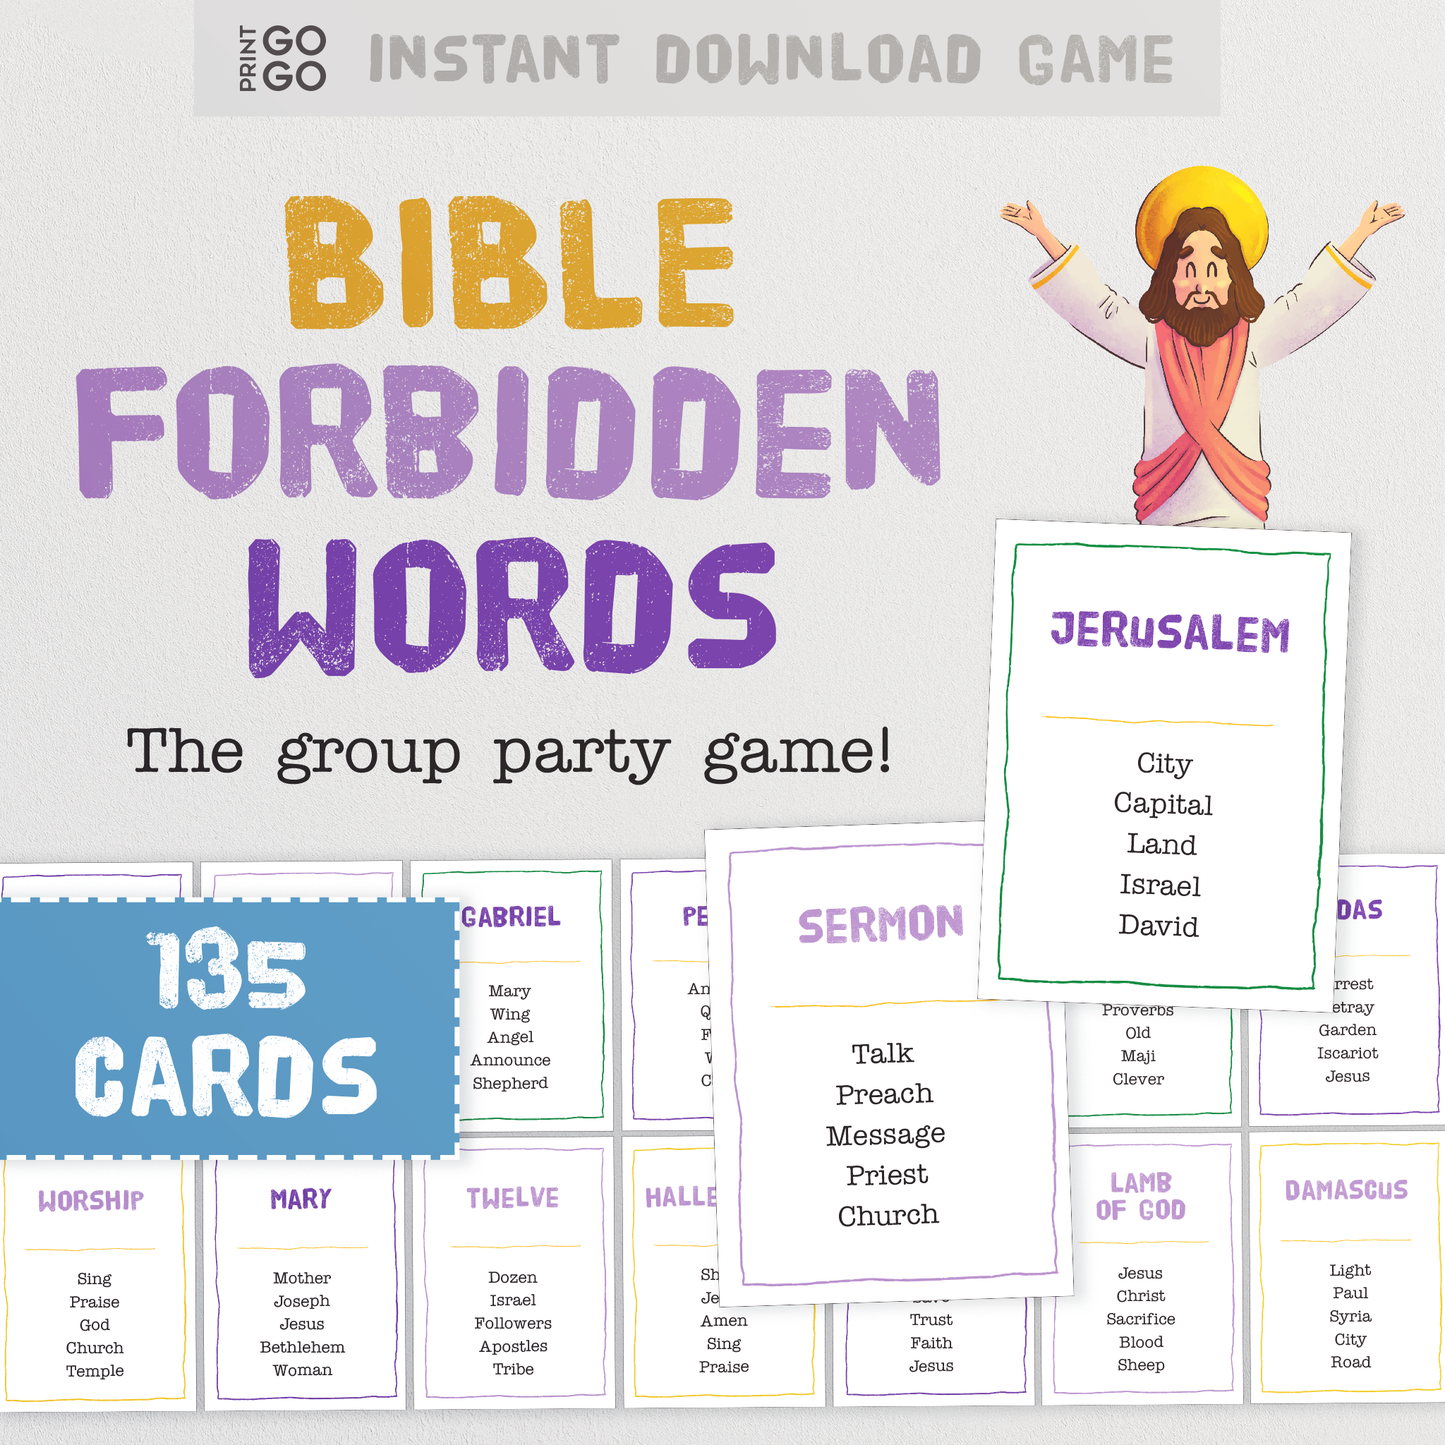 Bible Forbidden Words - The Hilarious Christian Group Party Game!